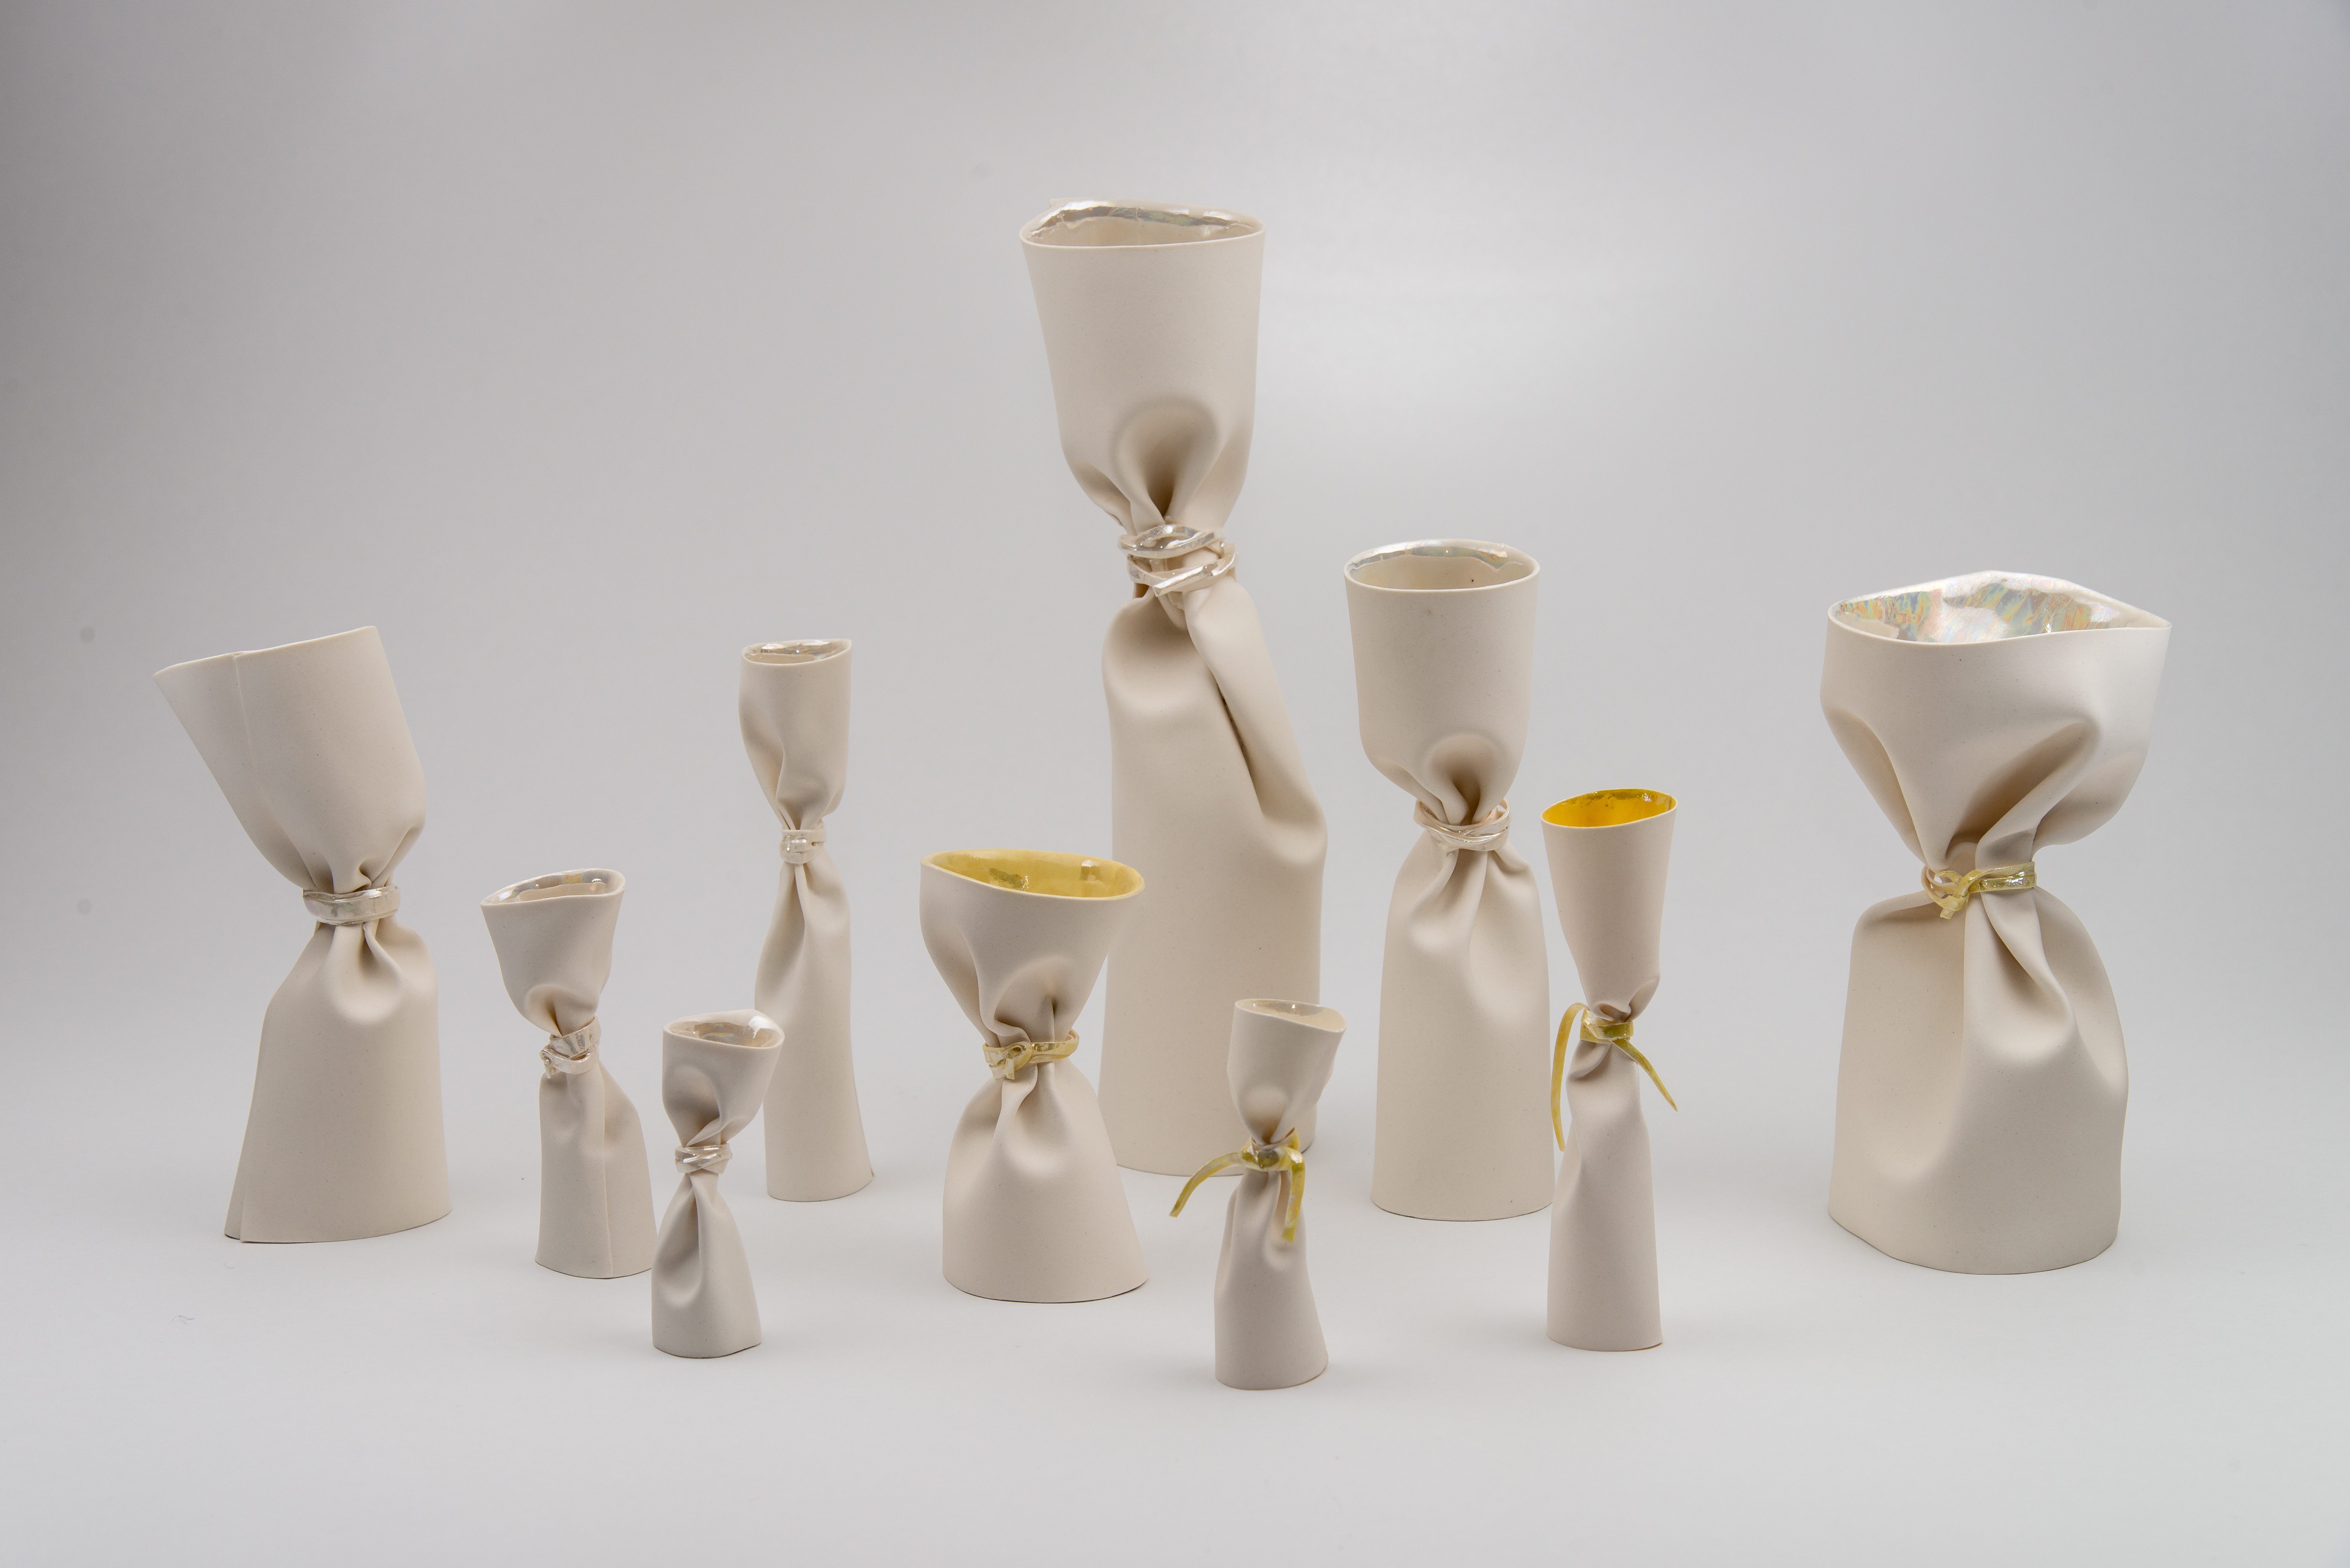 HAND BUILDING / PORCELAIN AND PAPER CLAY / EINAT COHEN